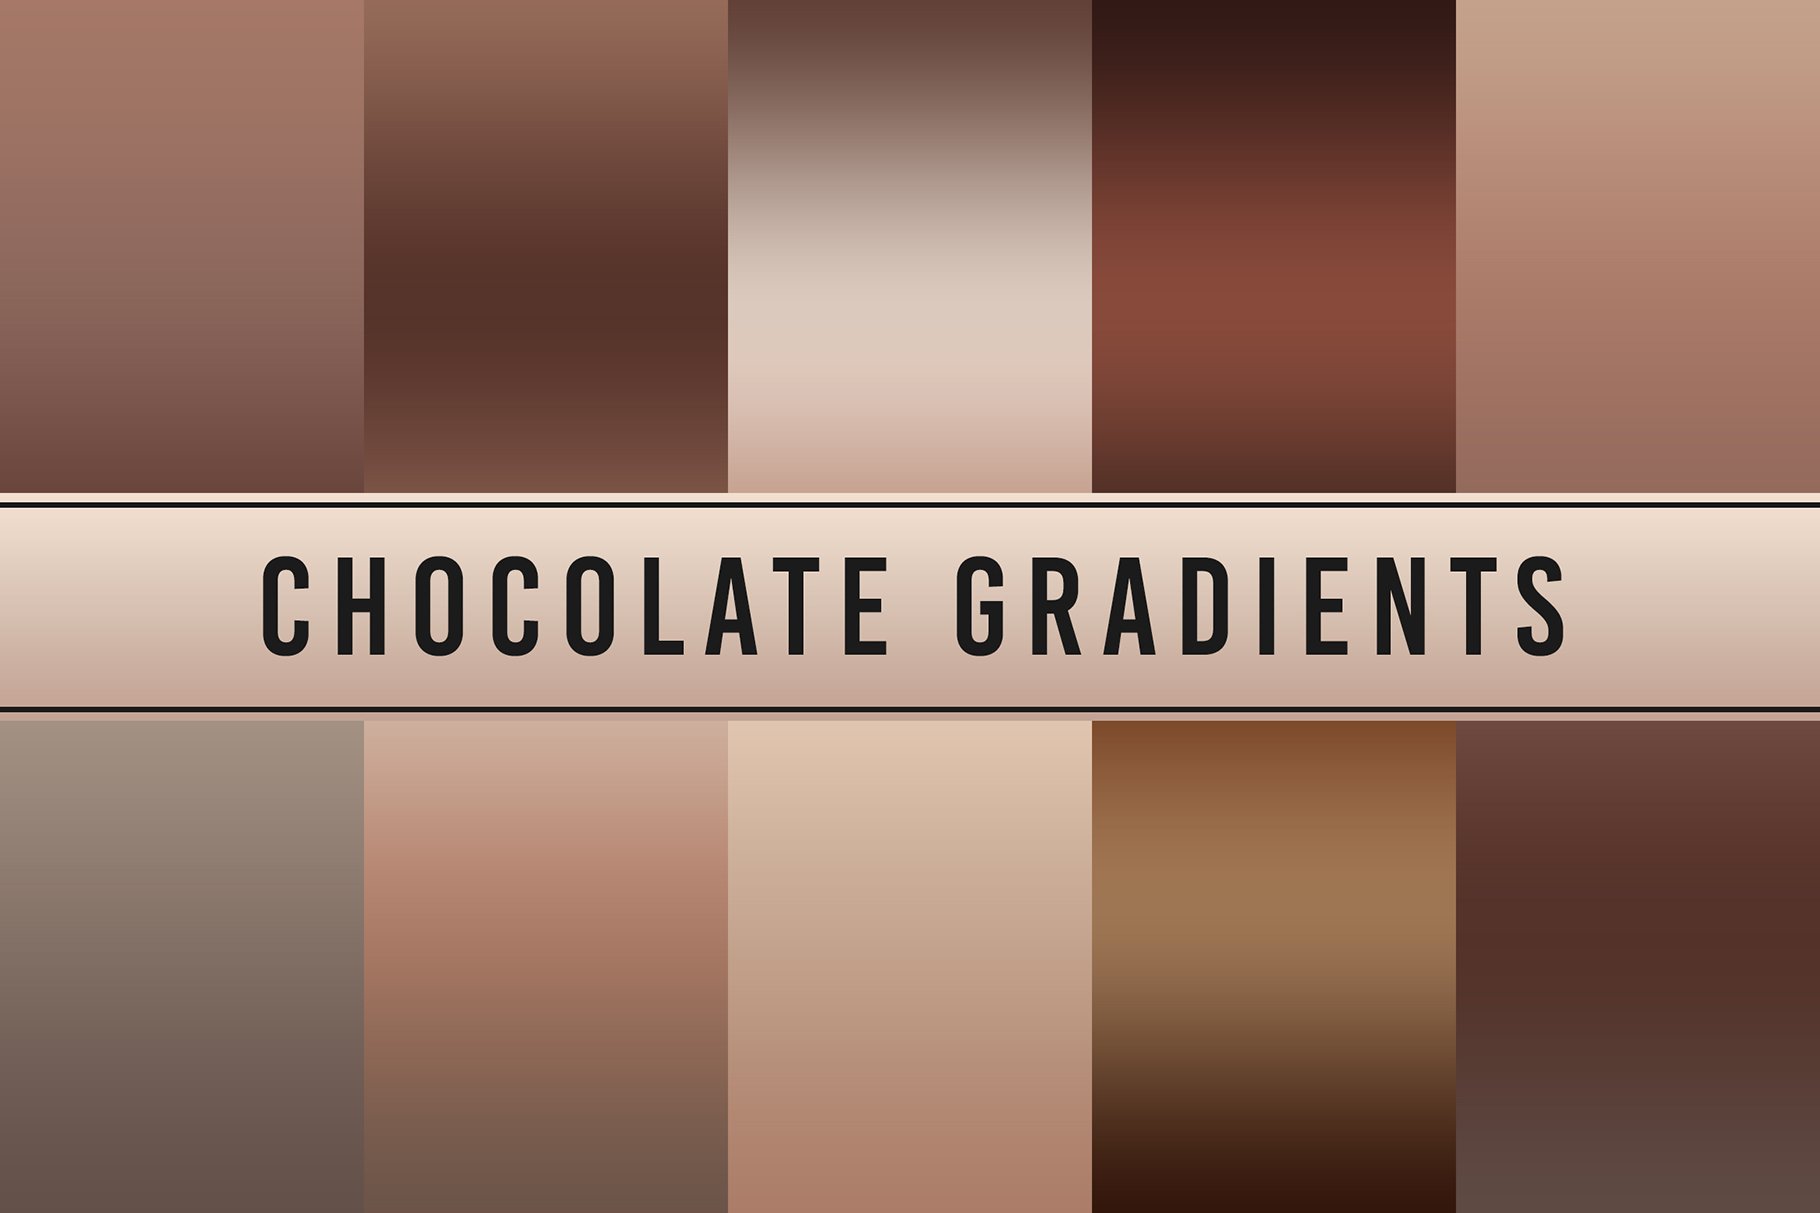 Chocolate Gradients cover image.